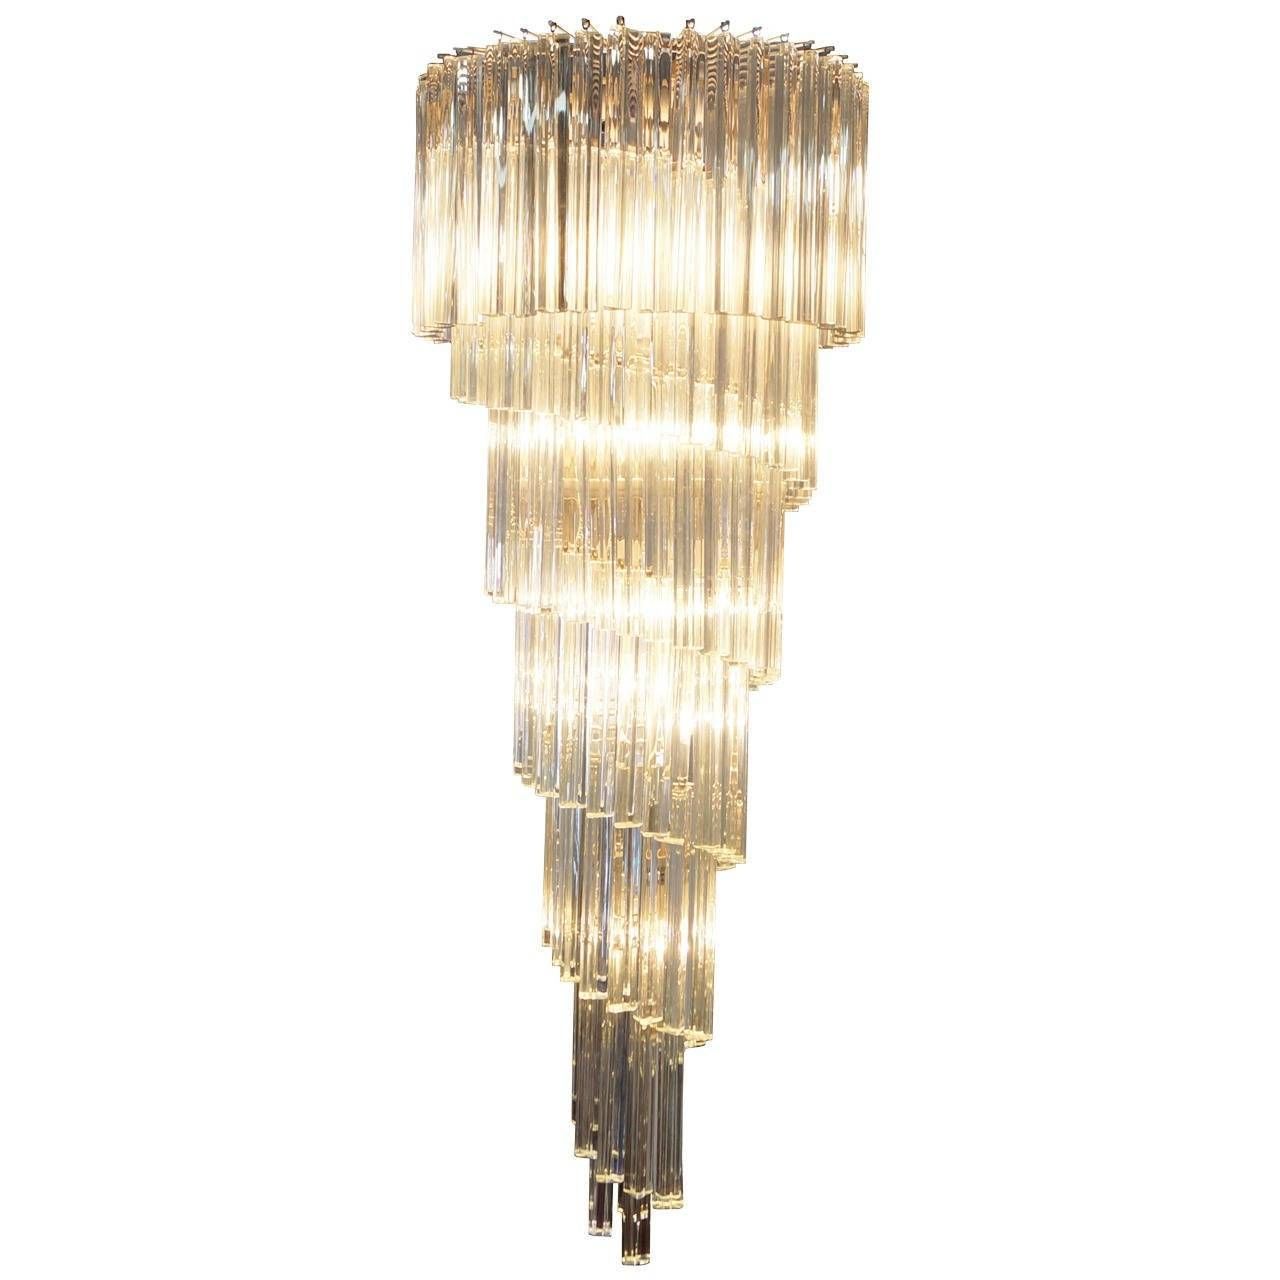 Spiral Murano Glass Chandeliervenini For Sale At 1stdibs For Venetian Glass Ceiling Lights (View 8 of 15)